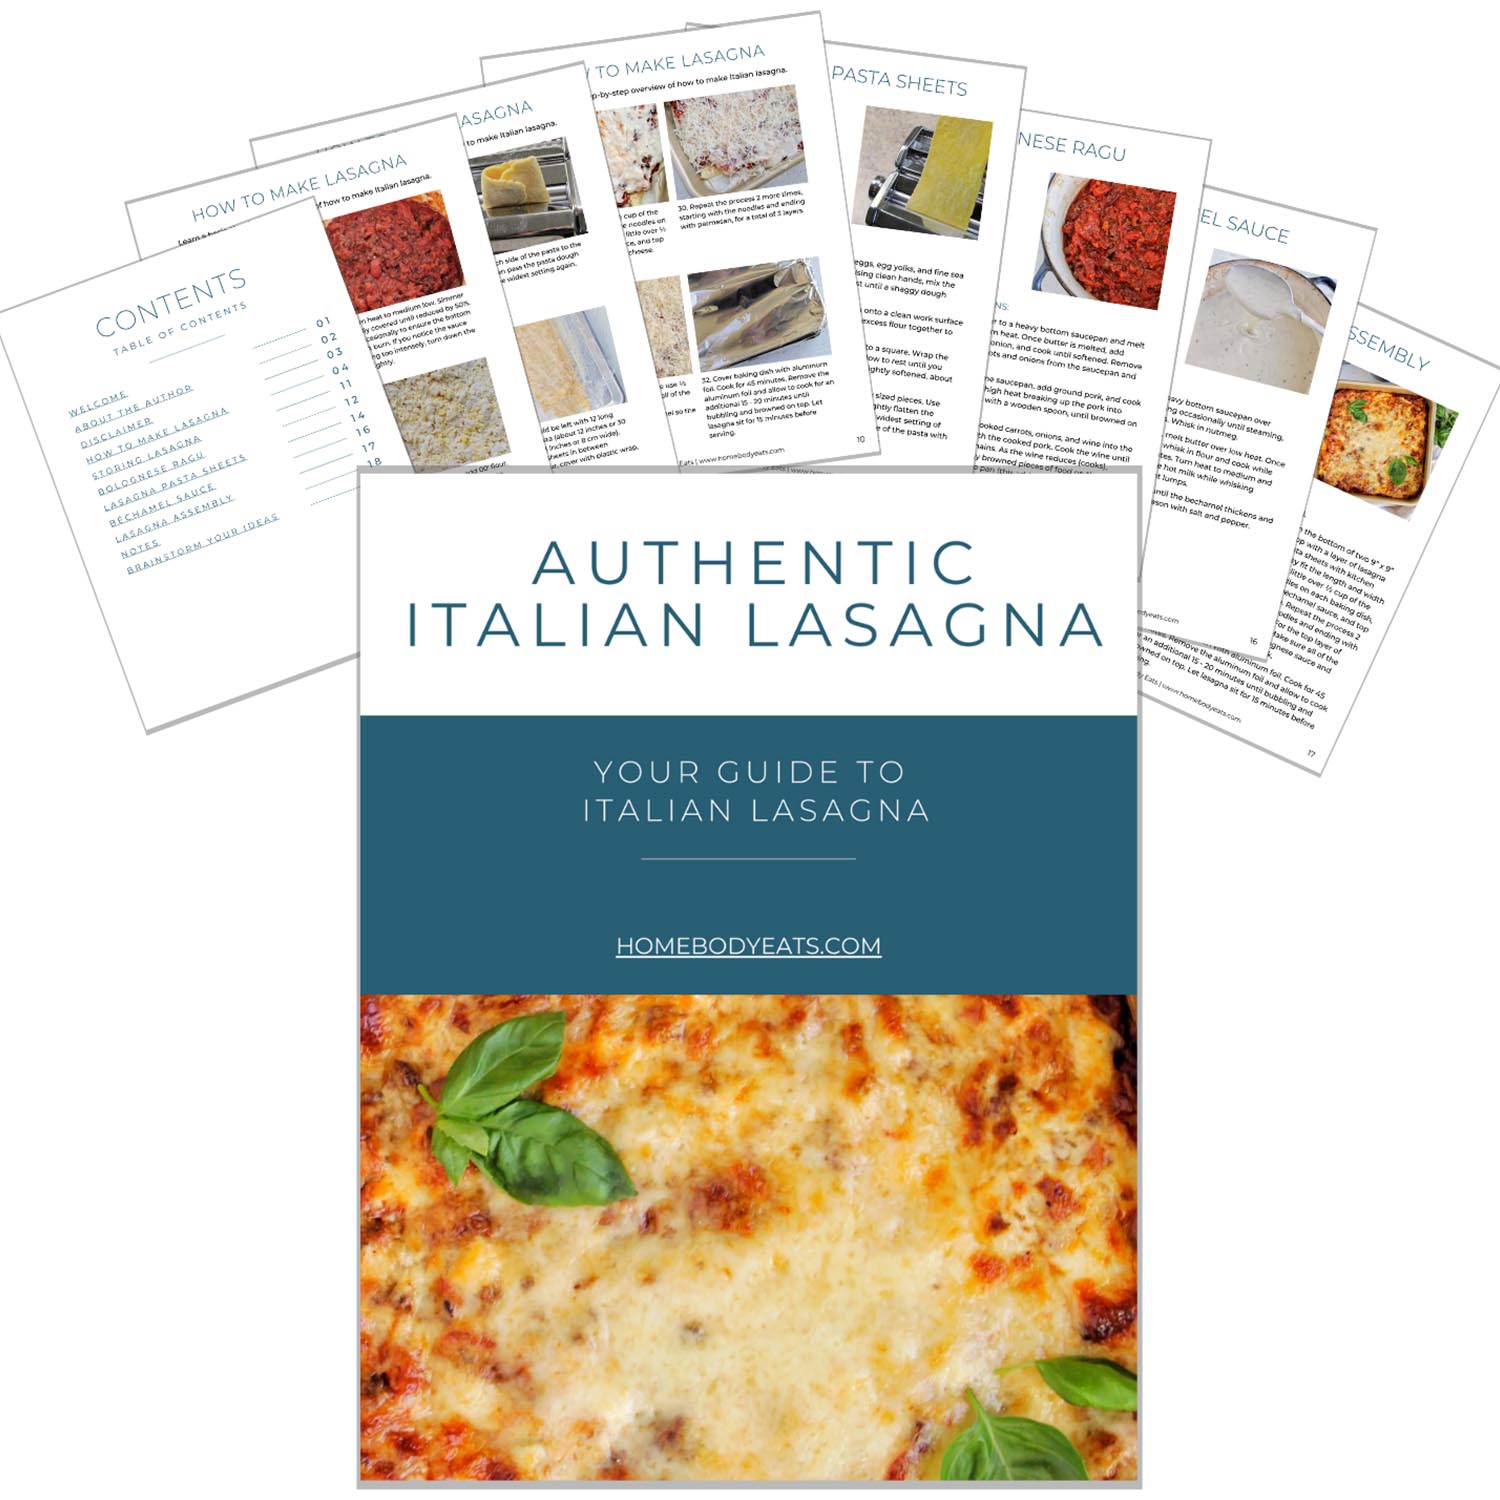 Pages of an ebook promoting the Authentic Italian Lasagna course.